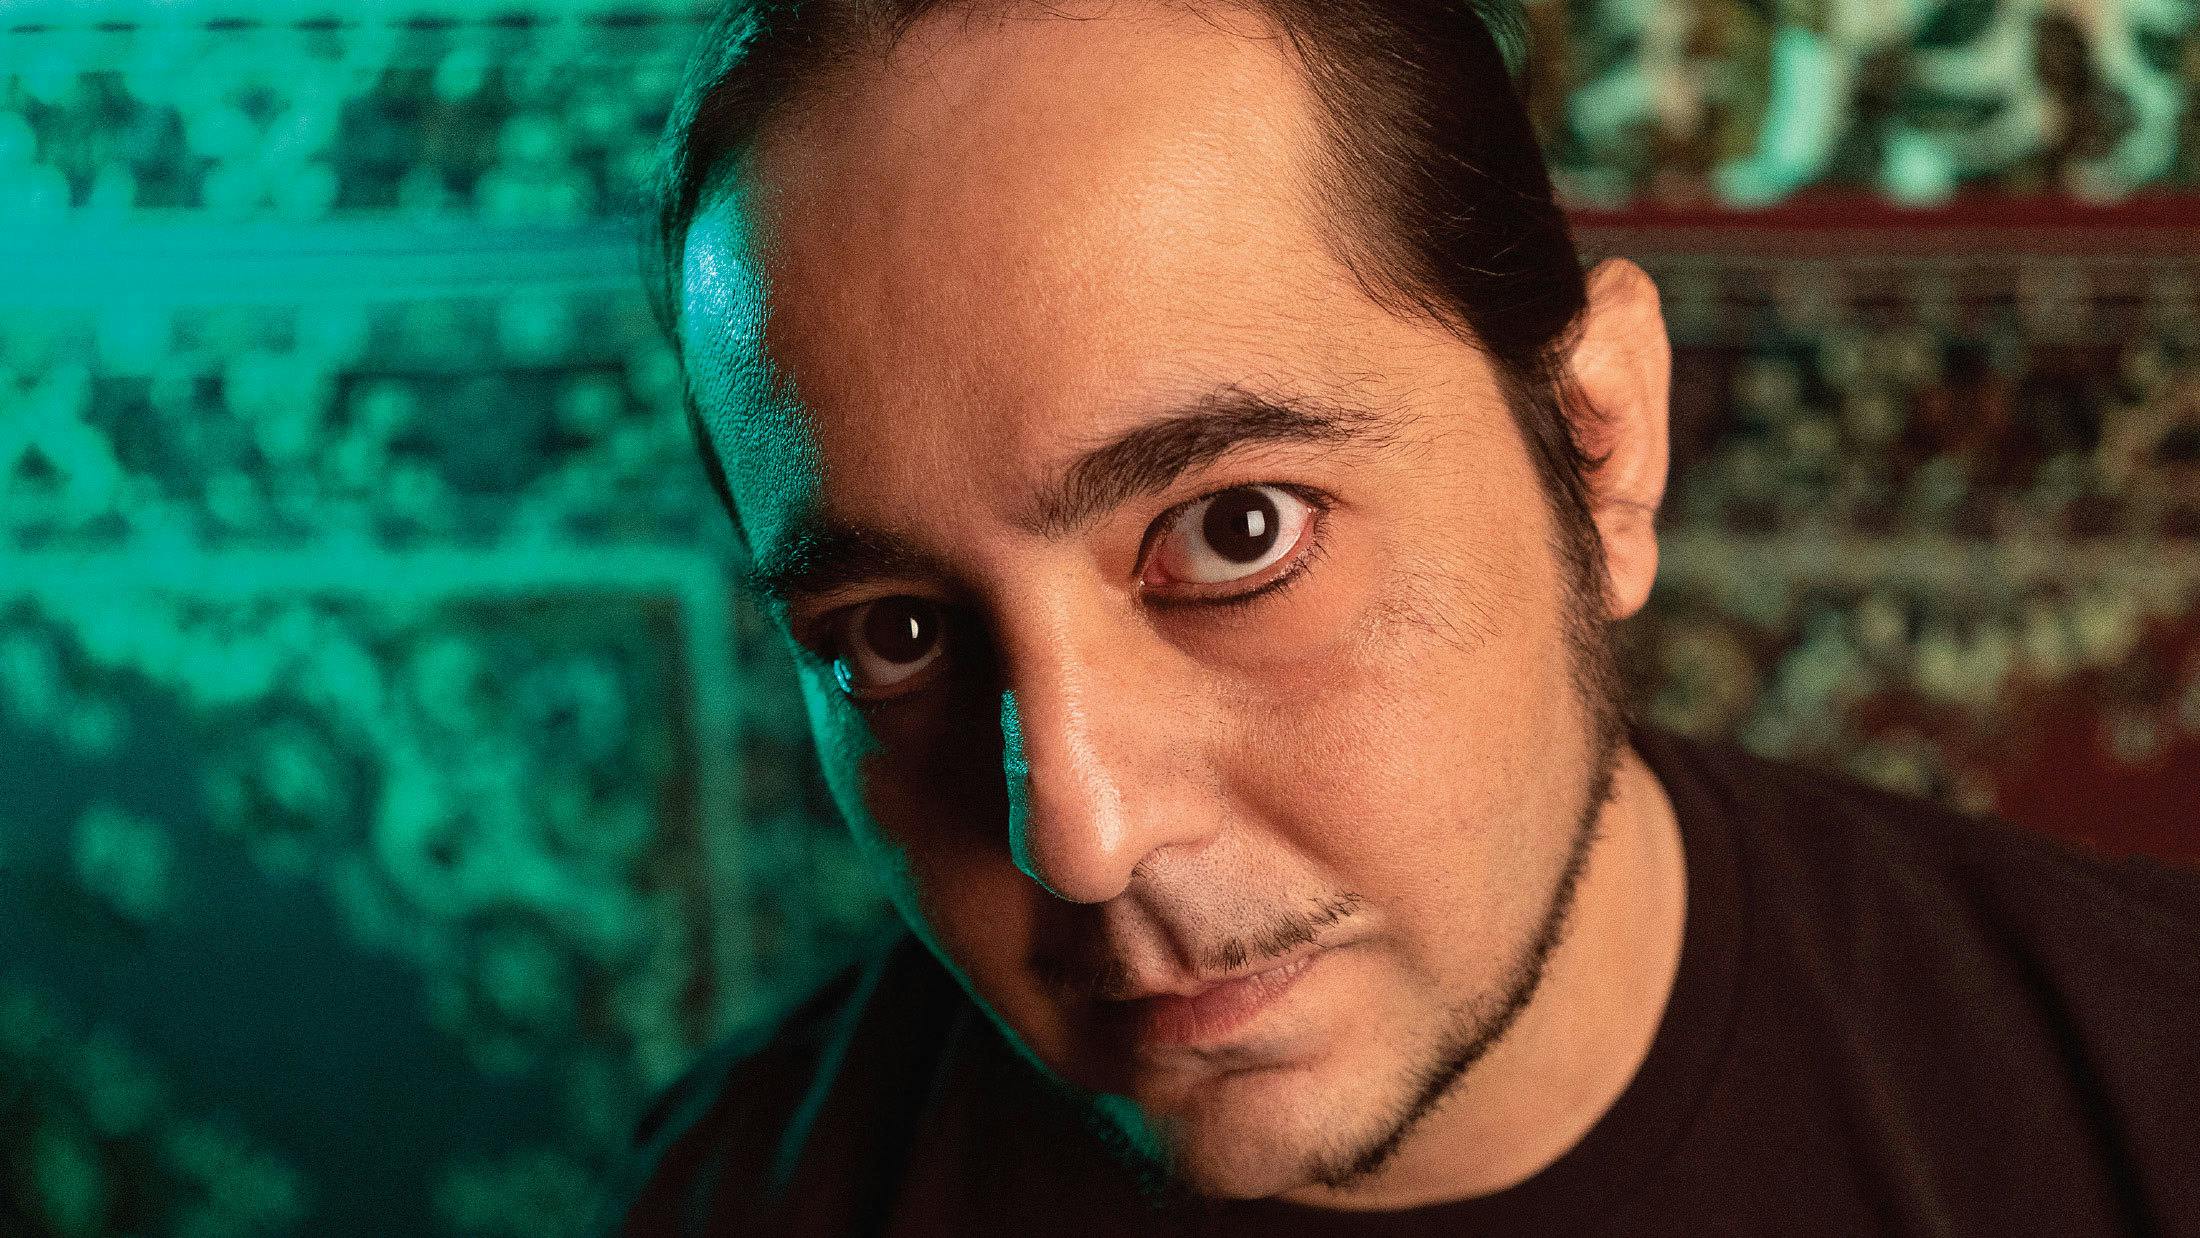 Daron Malakian: “The alternative is that I could have been a solider for Saddam Hussein… God knows how that would have ended up”